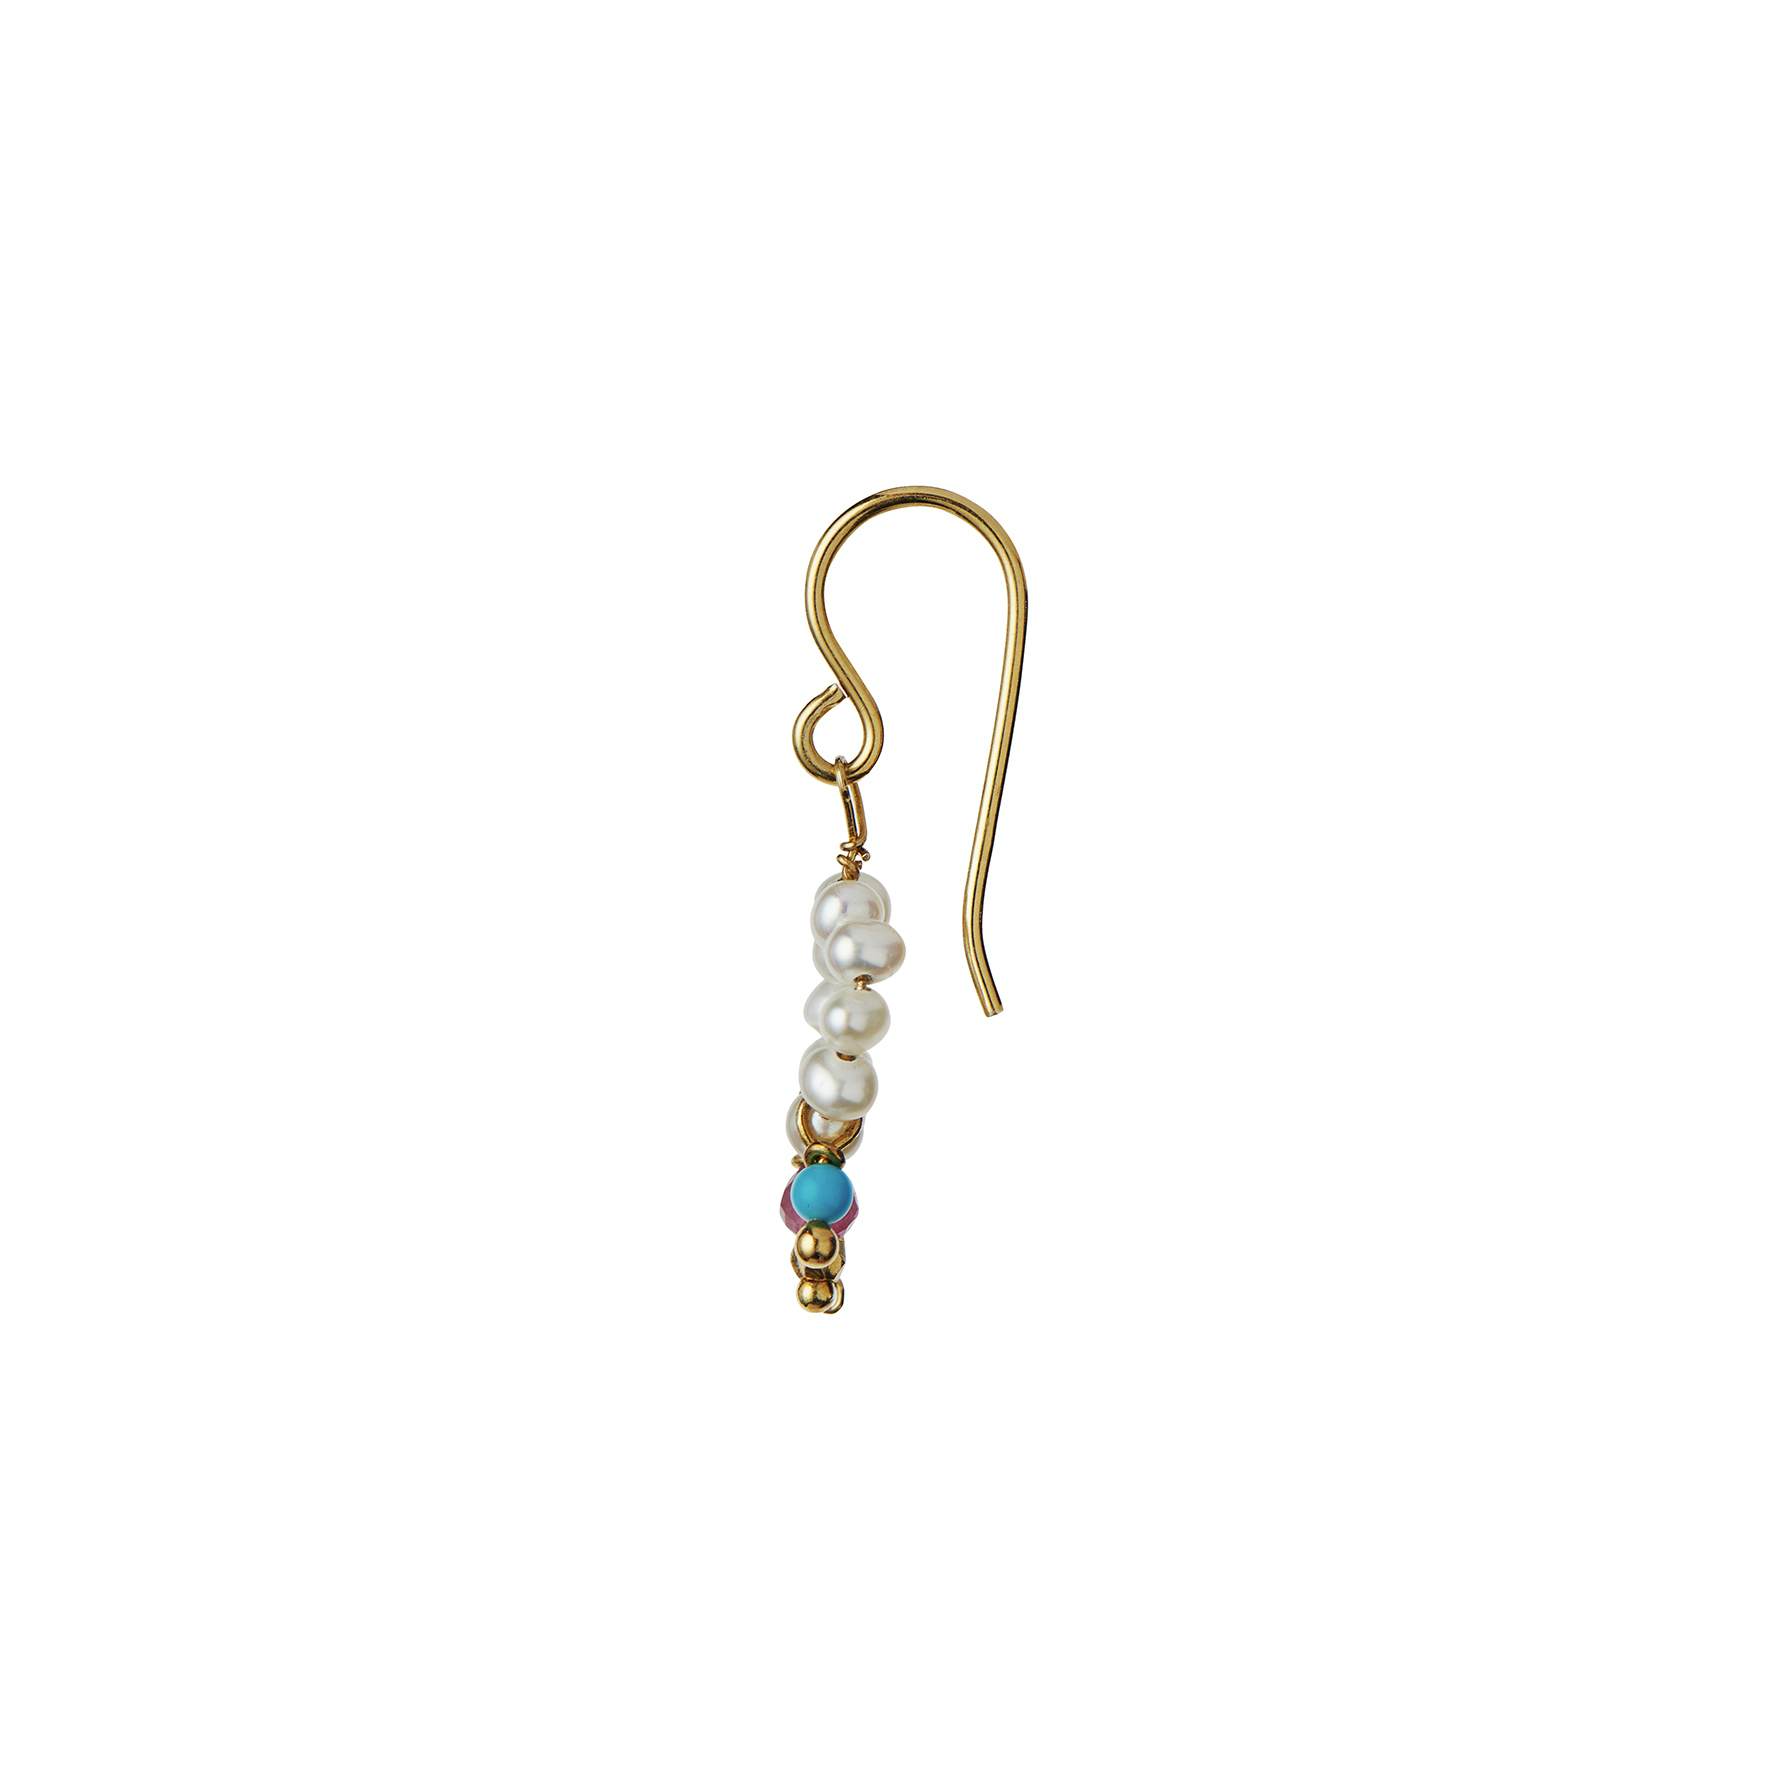 Petit Heavenly Pearl Dream Earring Turquoise & Pink Stones from STINE A Jewelry in Goldplated-Silver Sterling 925